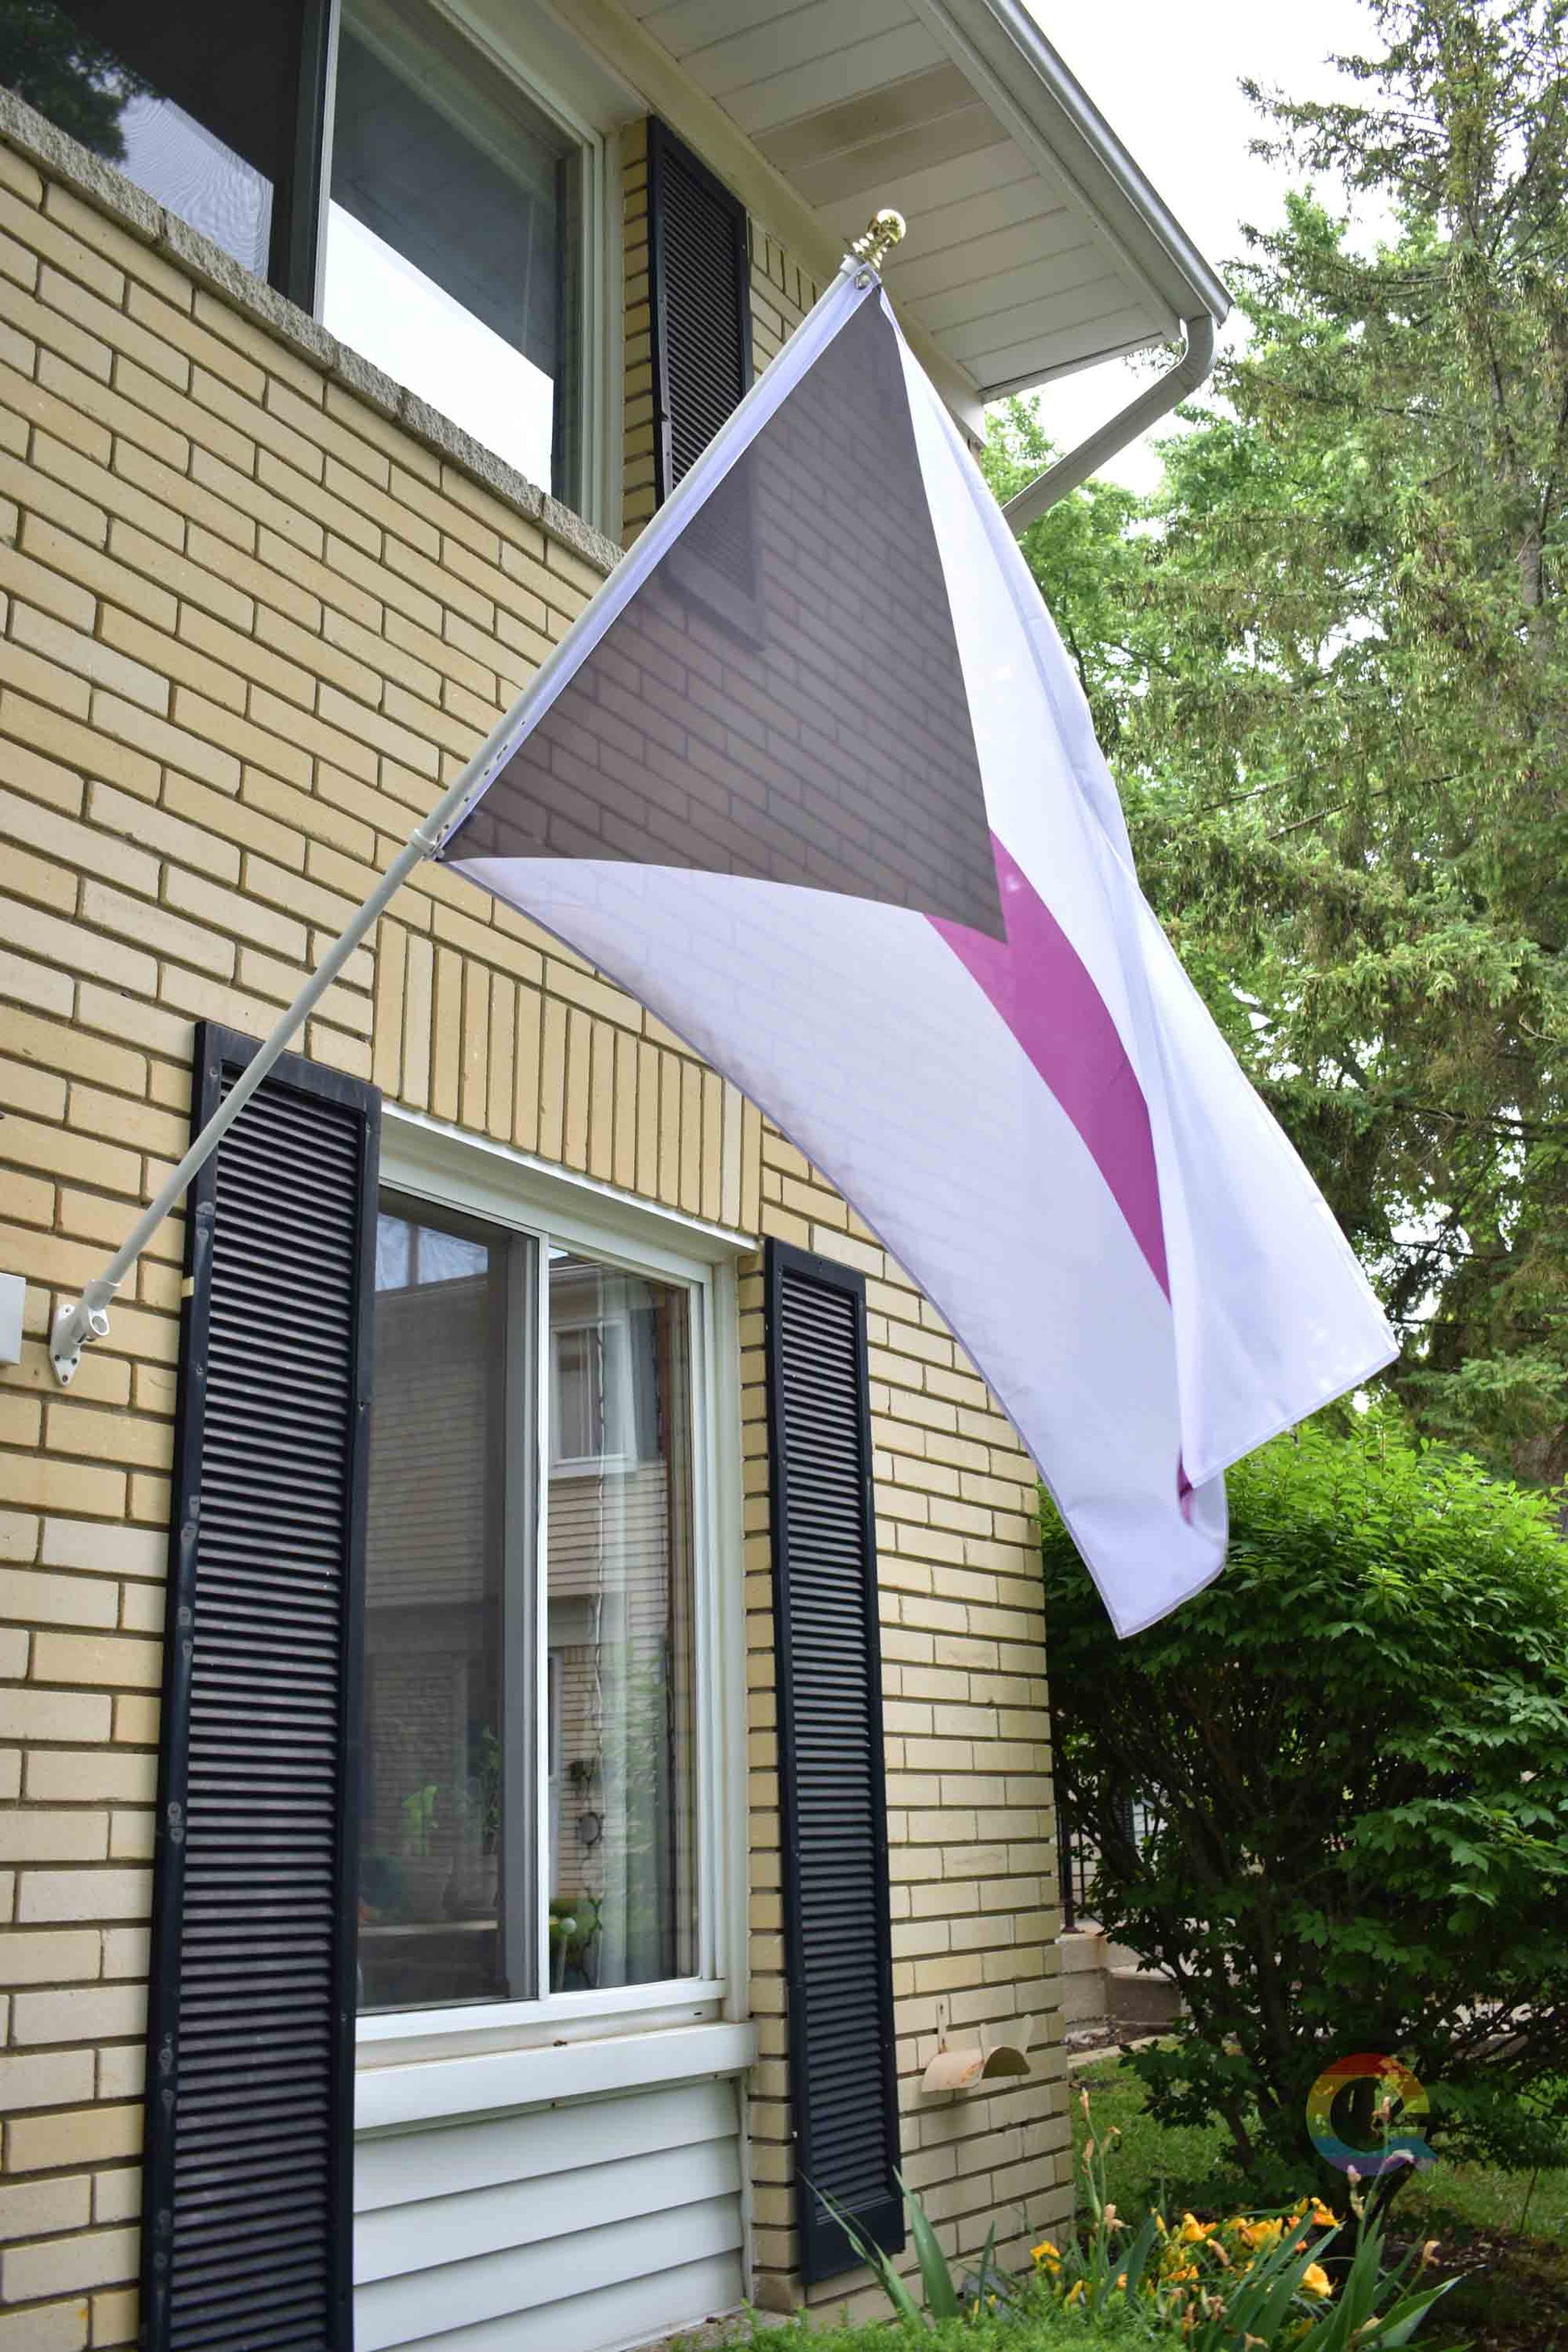 3’x5’ demisexual pride flag hanging from a flagpole on the outside of a light brick house with dark shutters